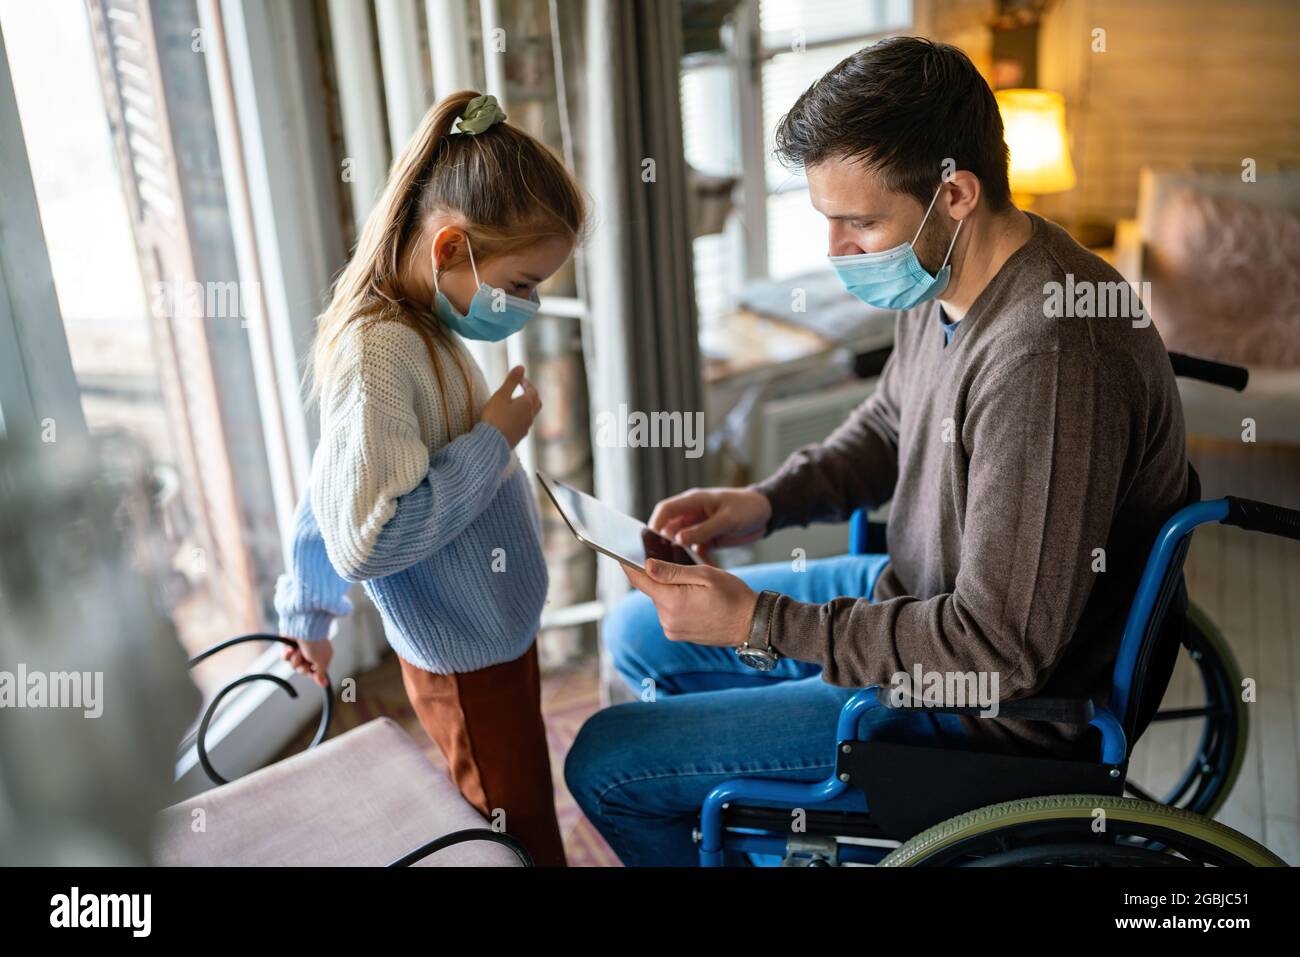 Father with disability in wheelchair using tablet at home with child while wearing masks. Stock Photo